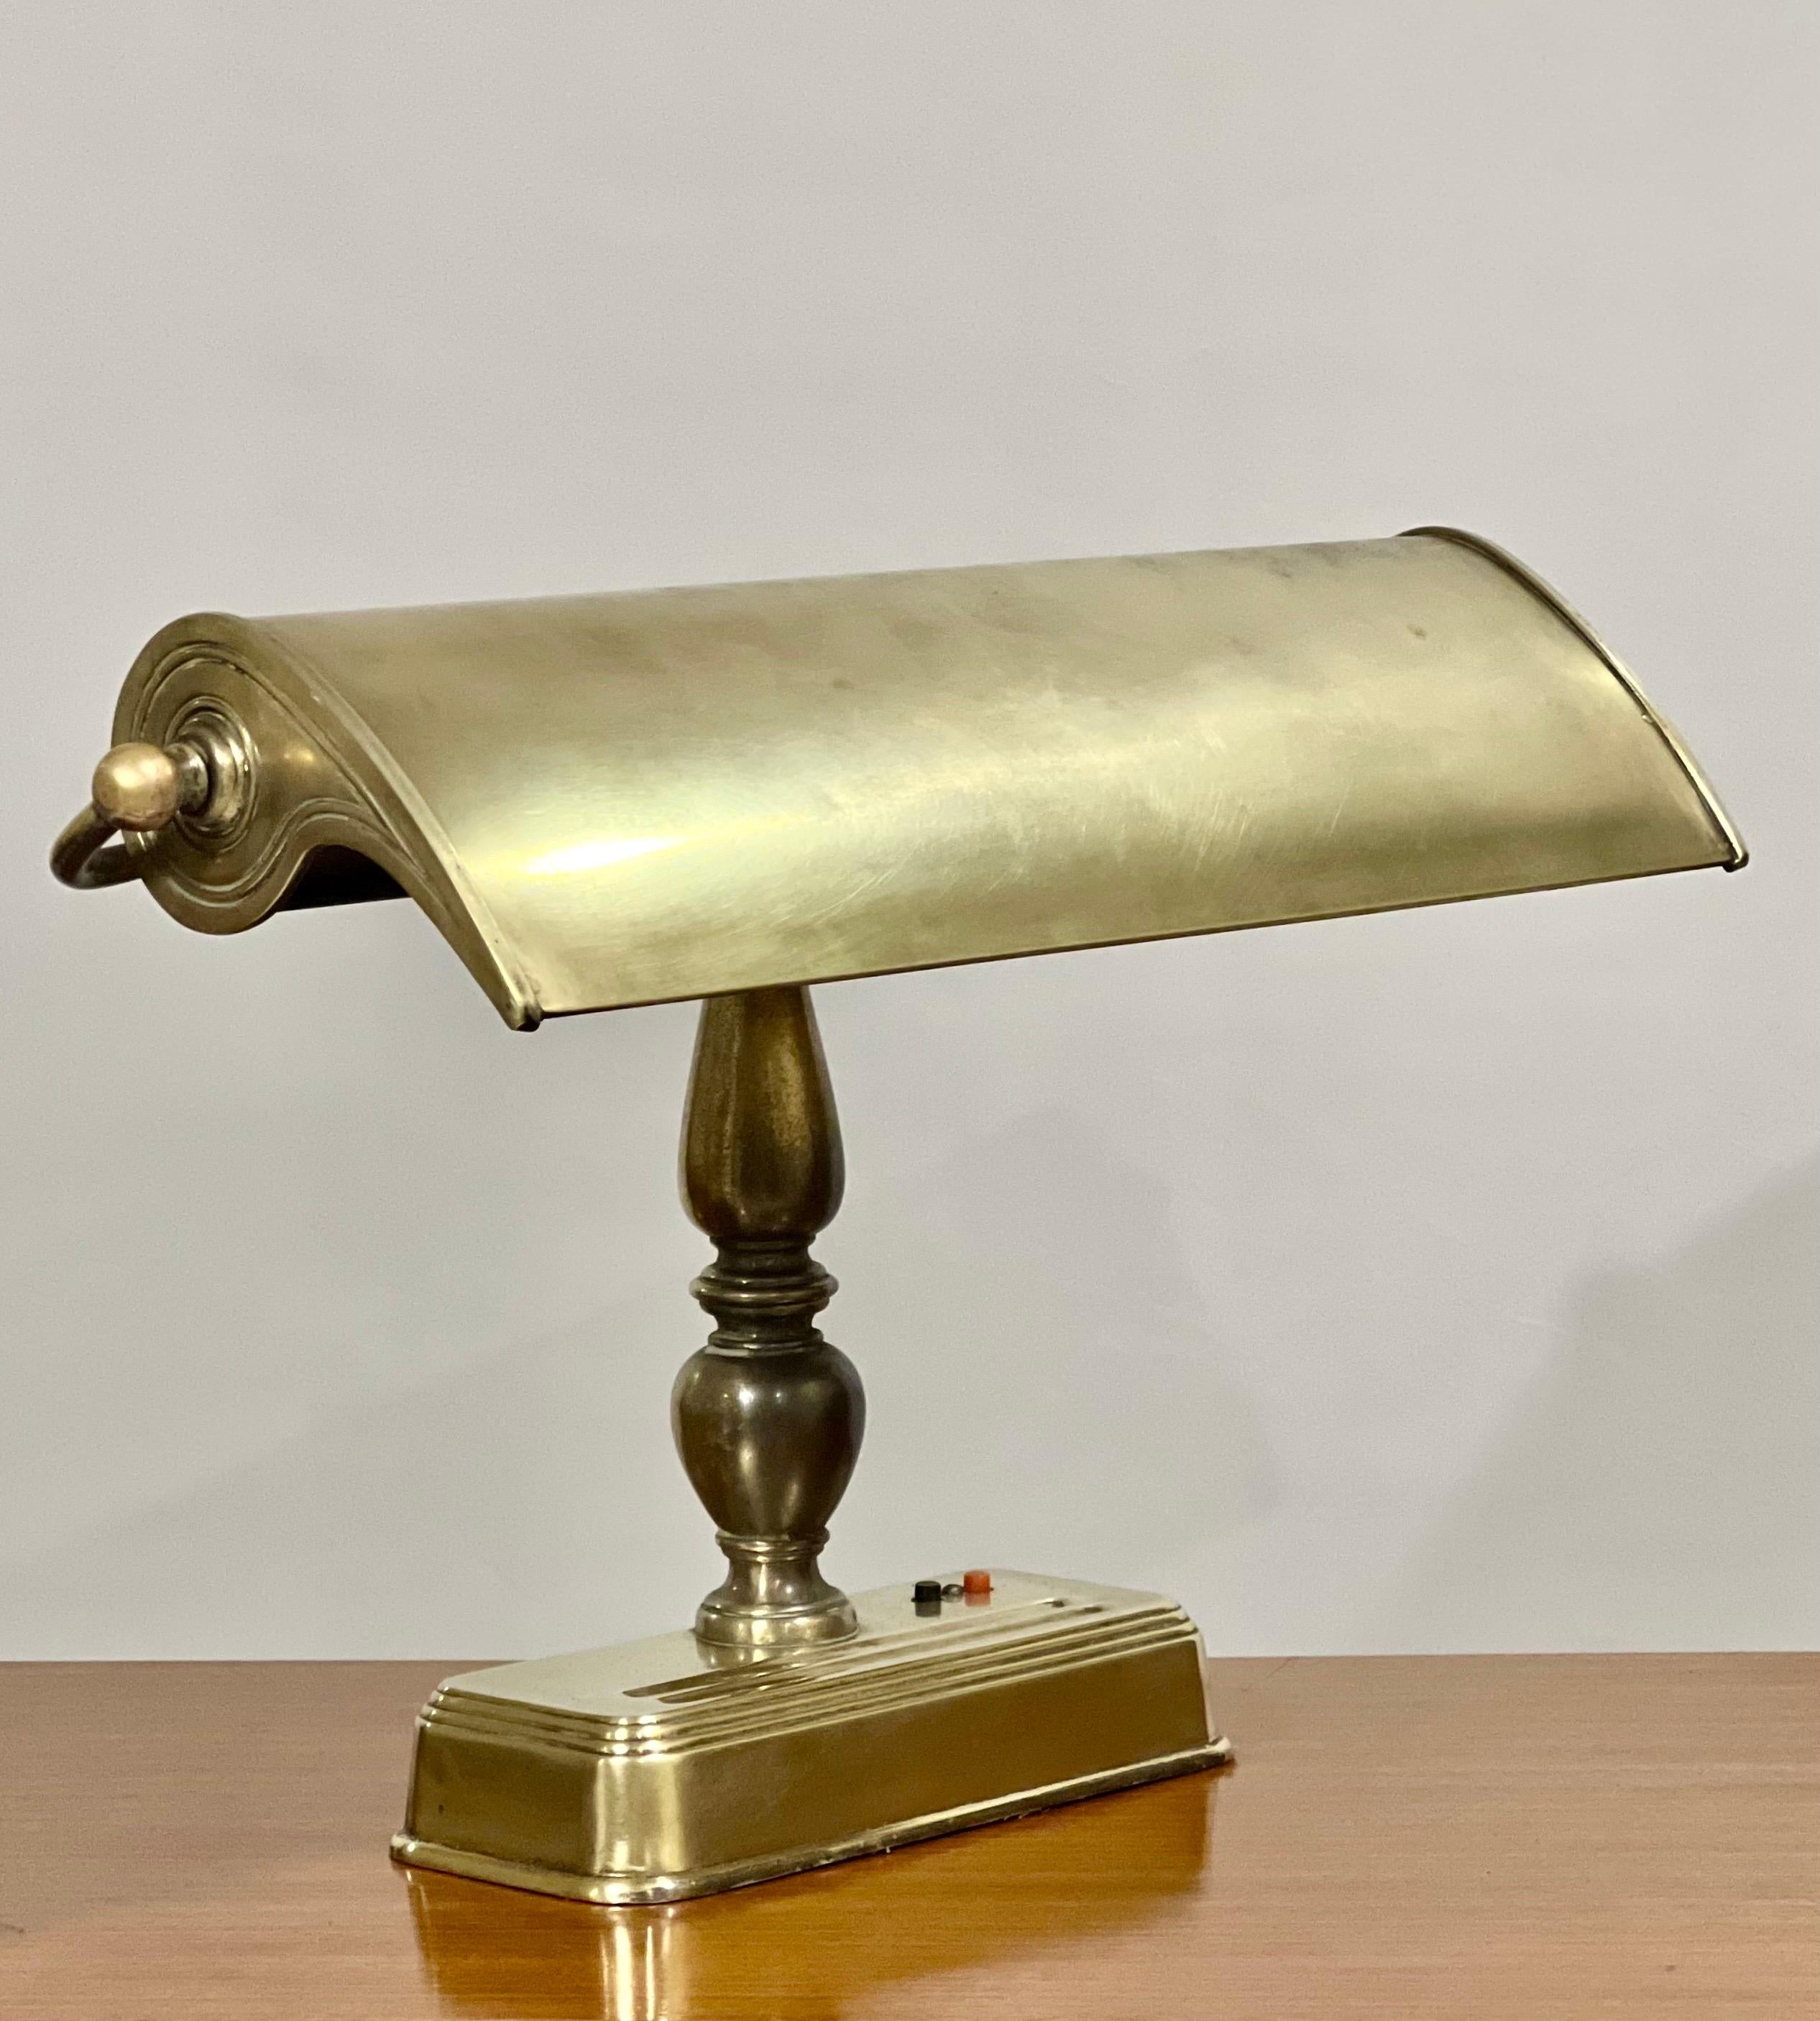 Large banker's desk lamp with adjustable shade, circa 1950's.

This is an impressive lamp with great design . A balustrade form pedestal supports an adjustable shade with a white enamel underside and a single tube light fitting. (It currently has a